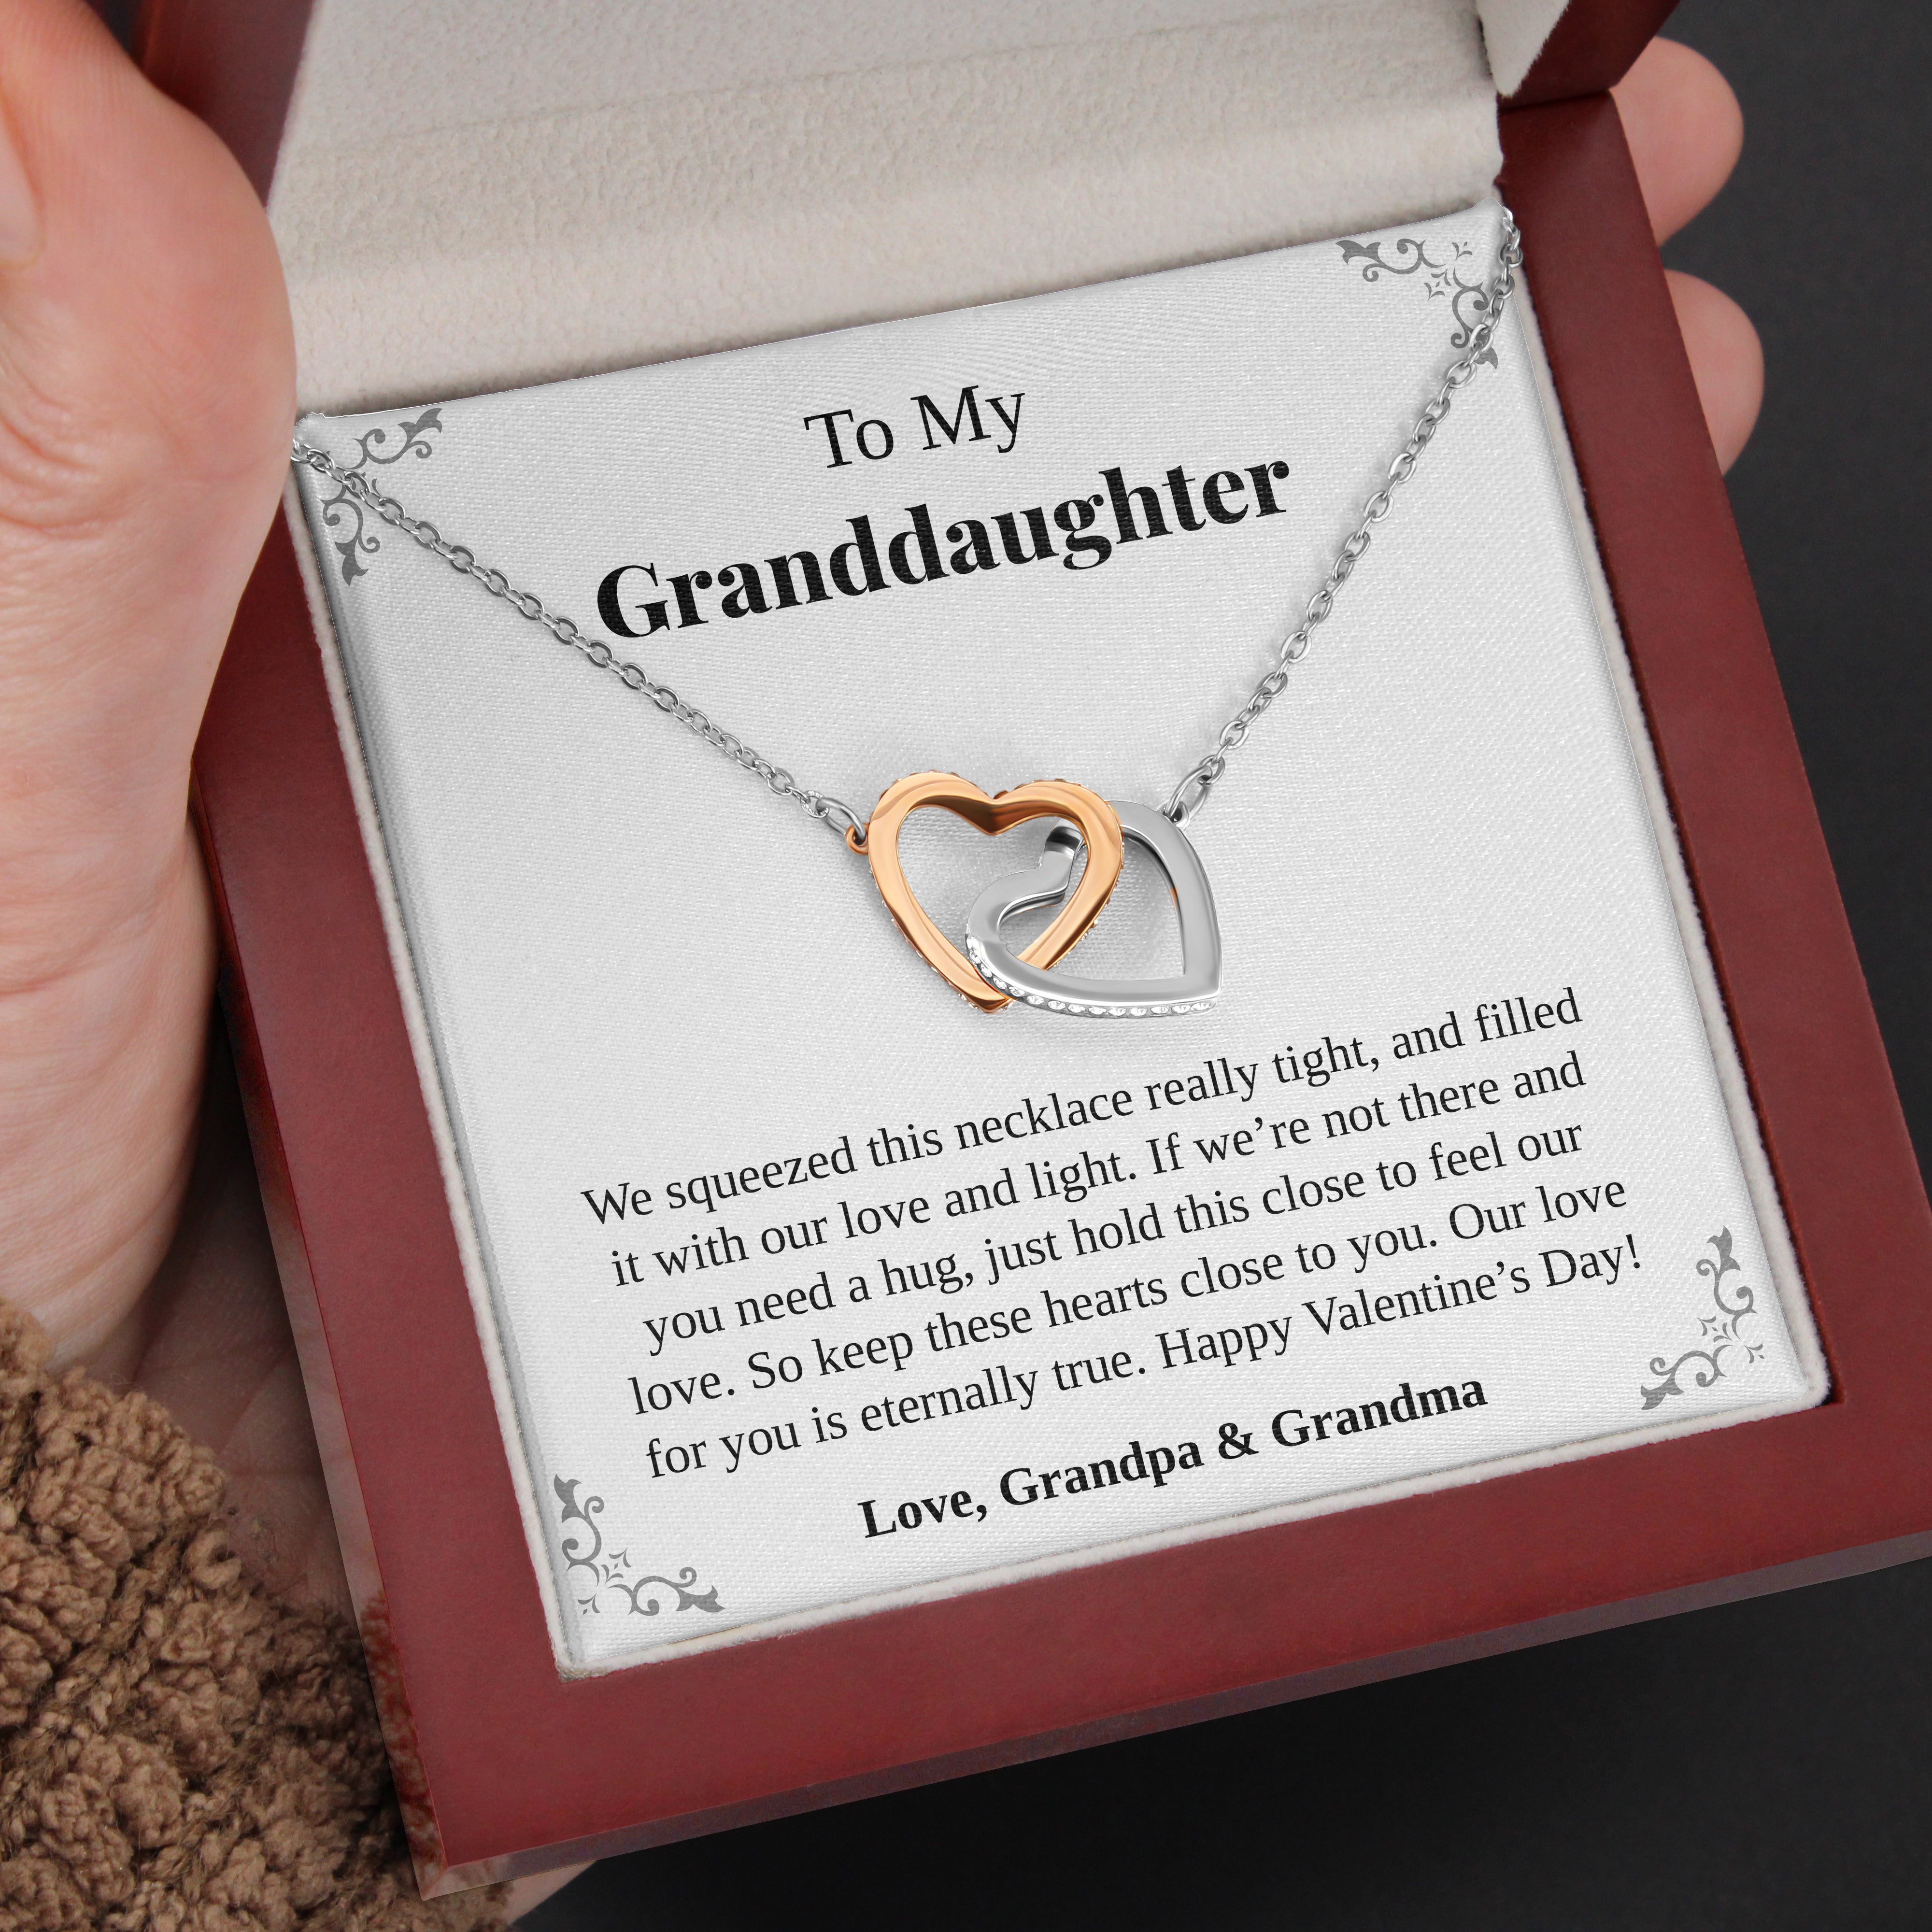 To Our Granddaughter | “Eternal Love” | Interlocking Hearts Necklace